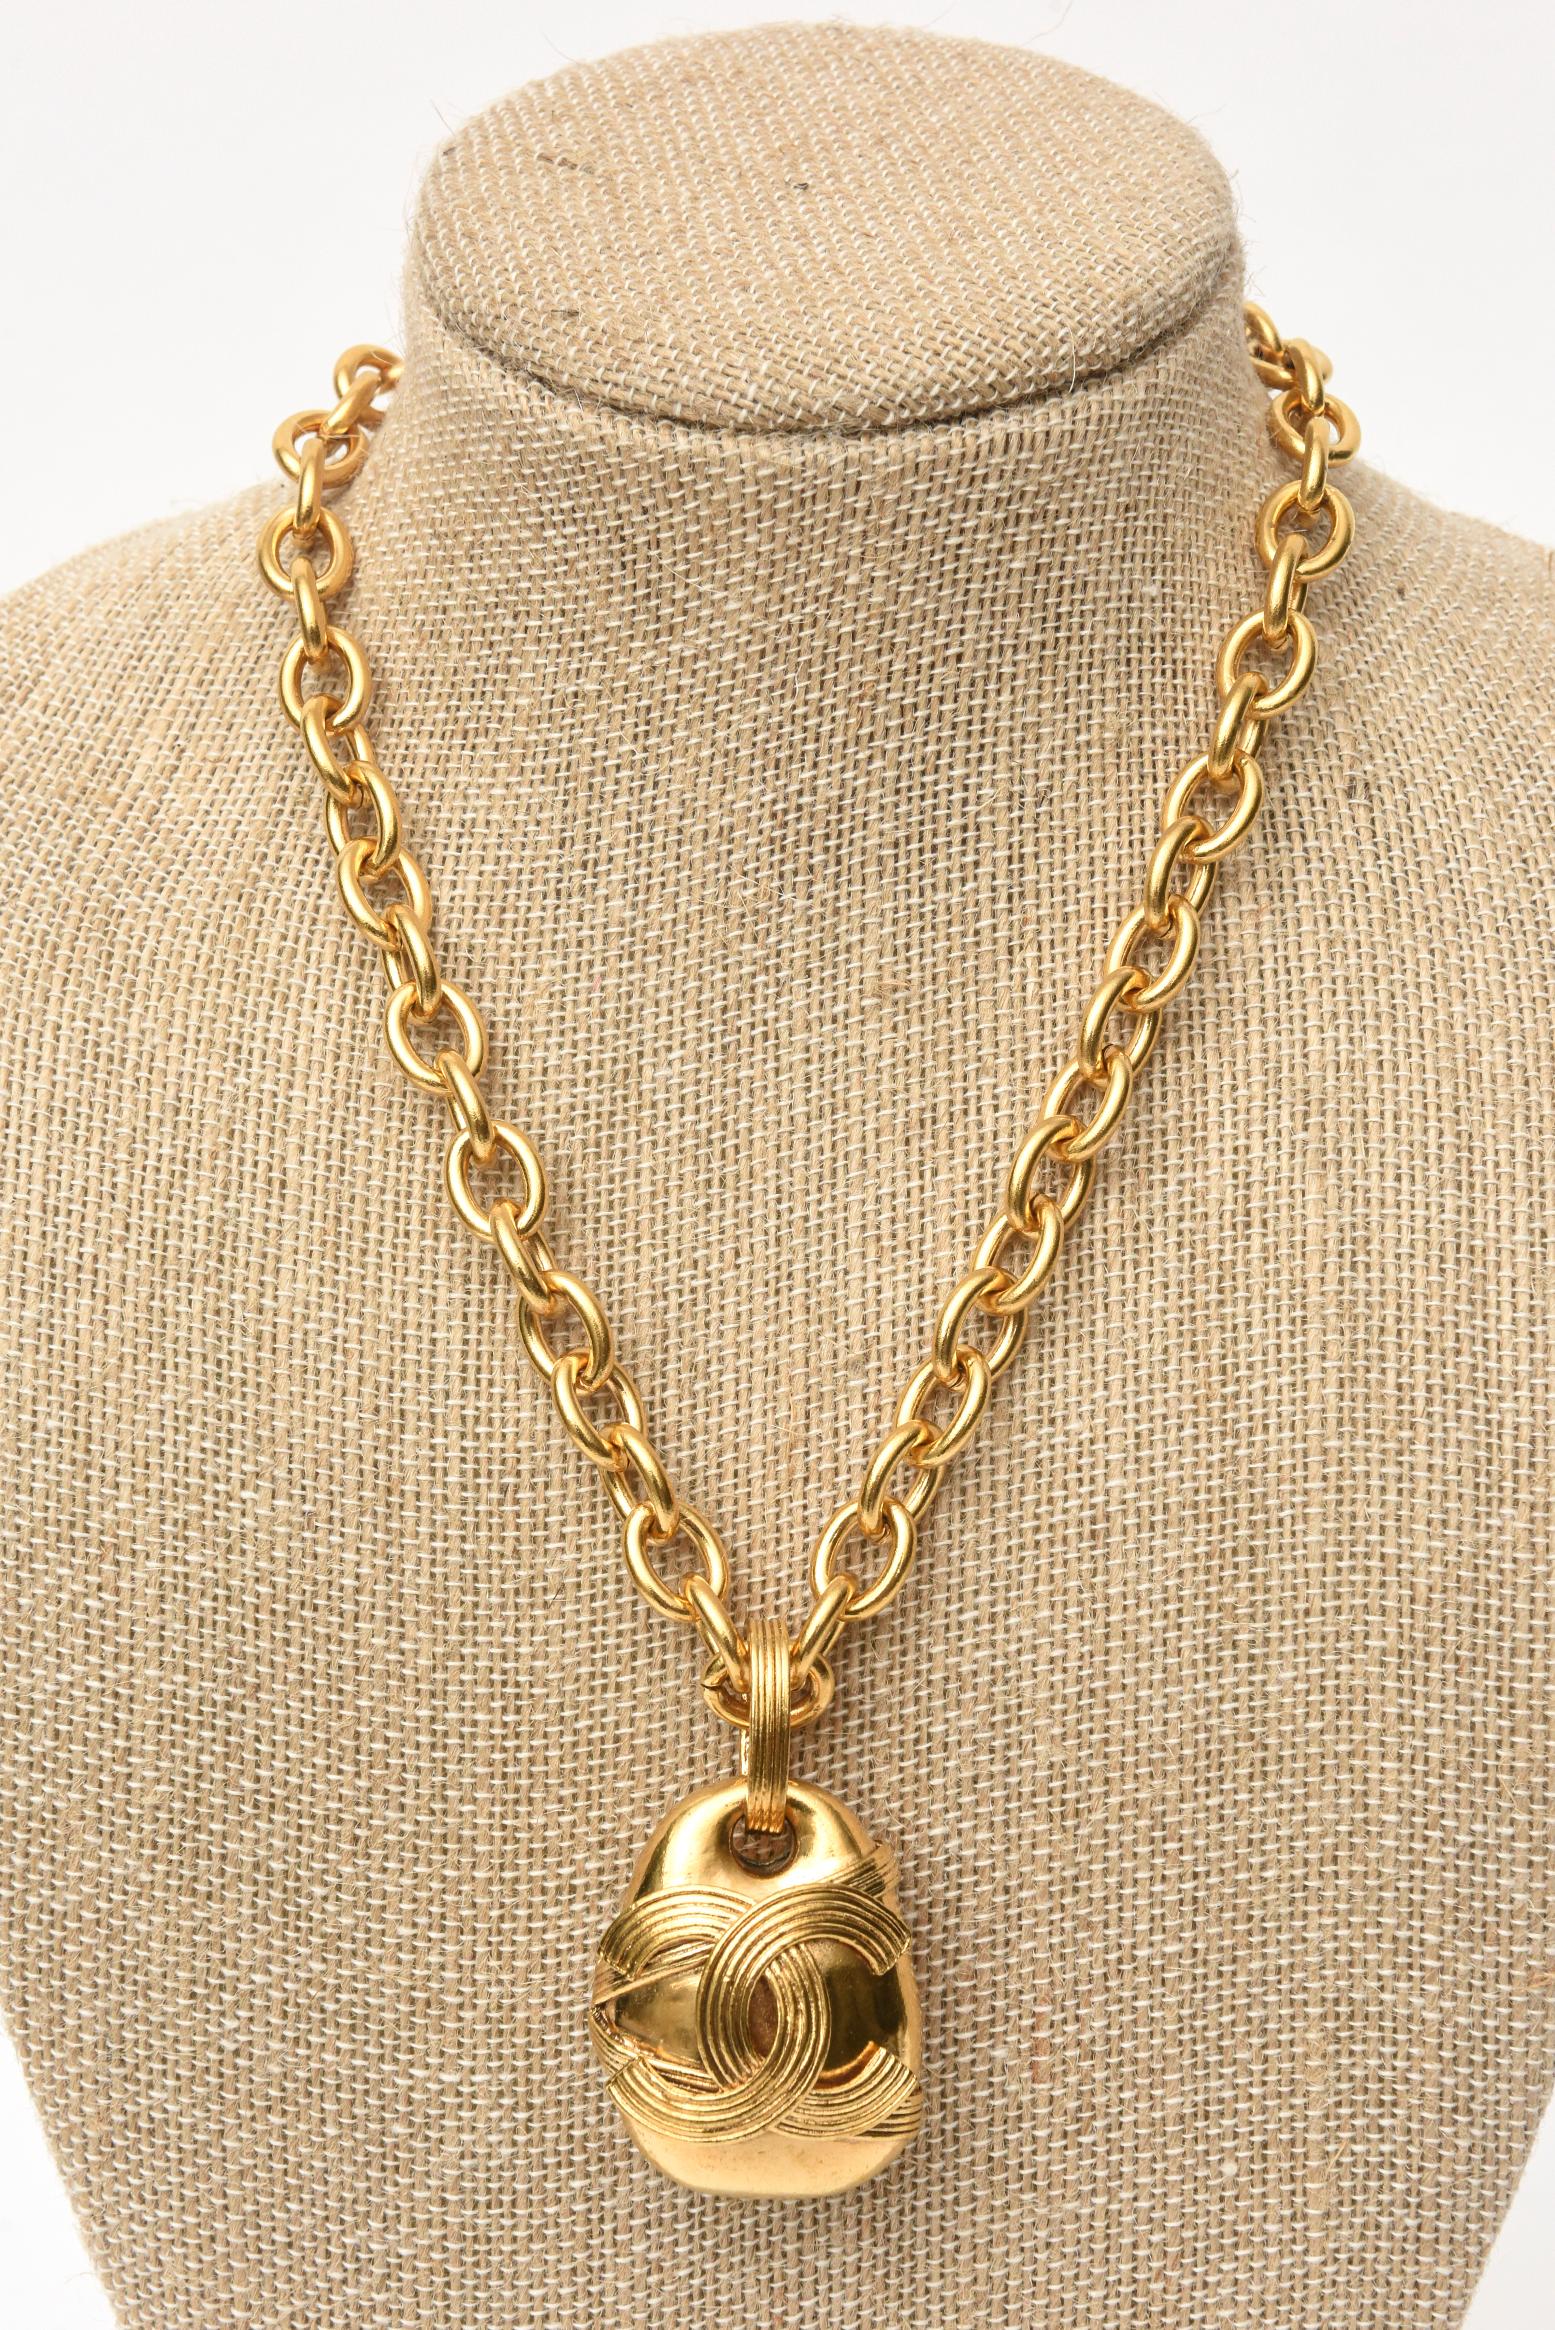 Chanel Chain Necklace With CC Pendant For Sale 1